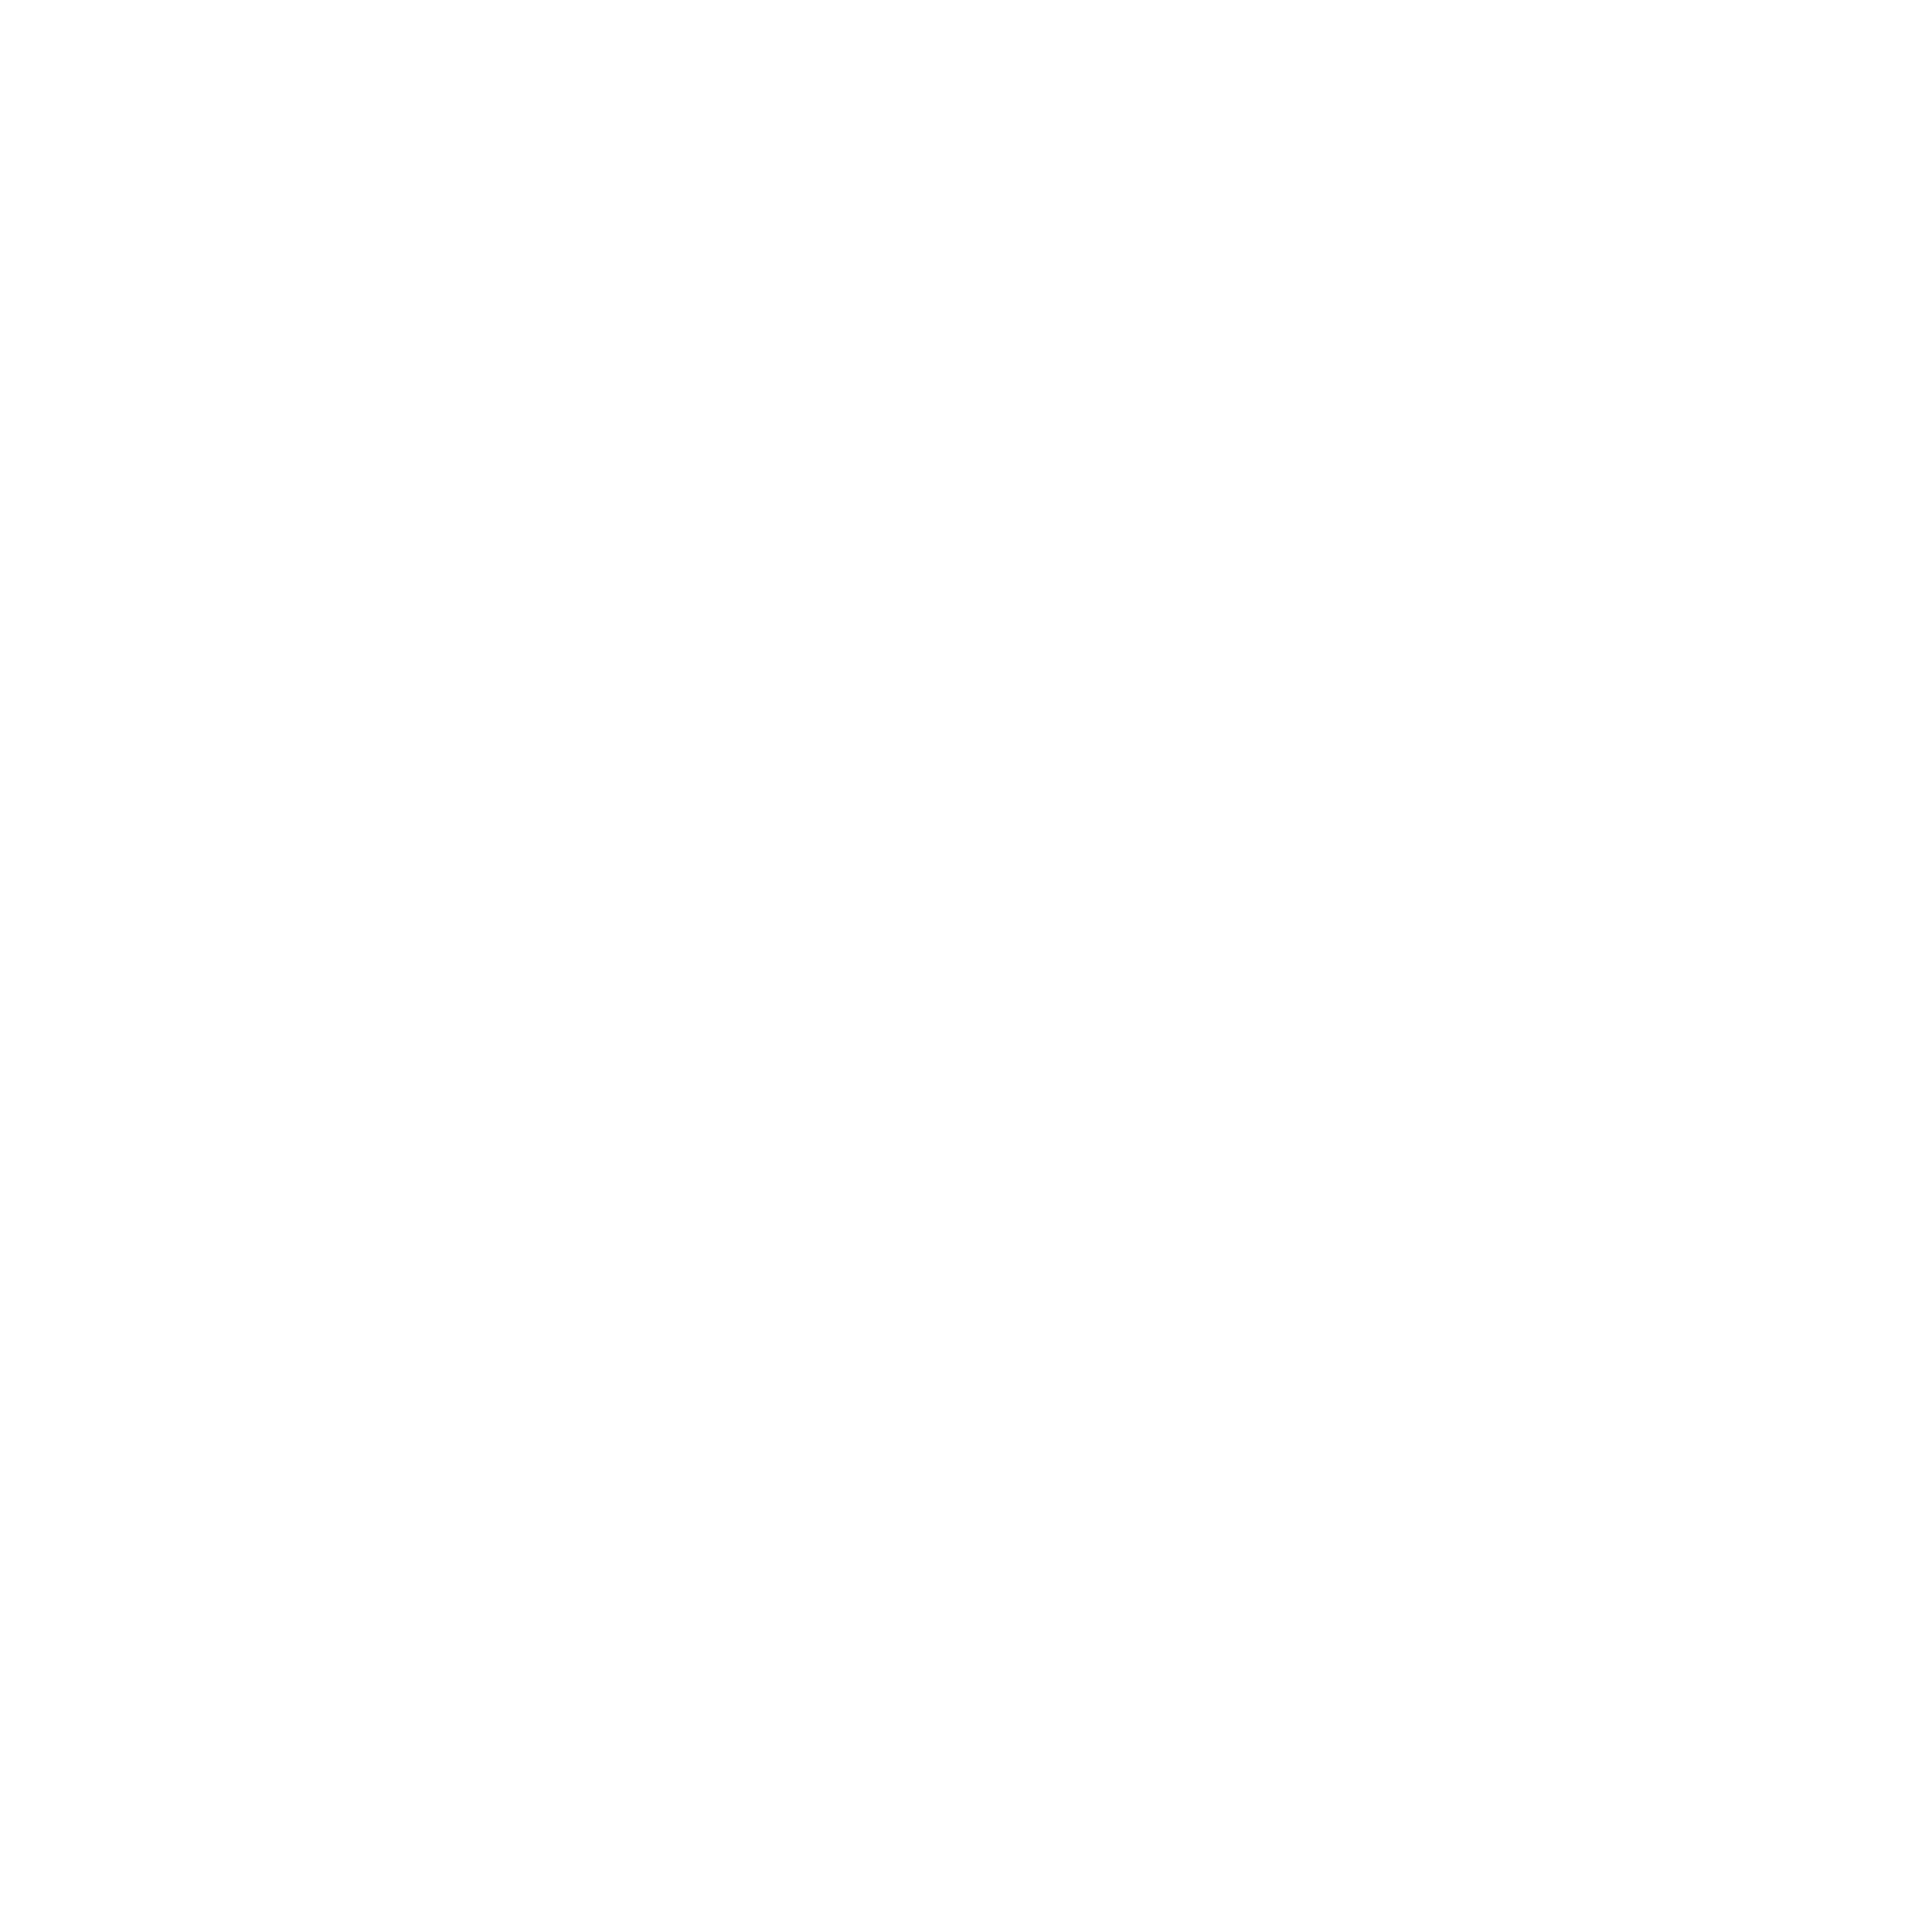 THE LOBSTER PLACE